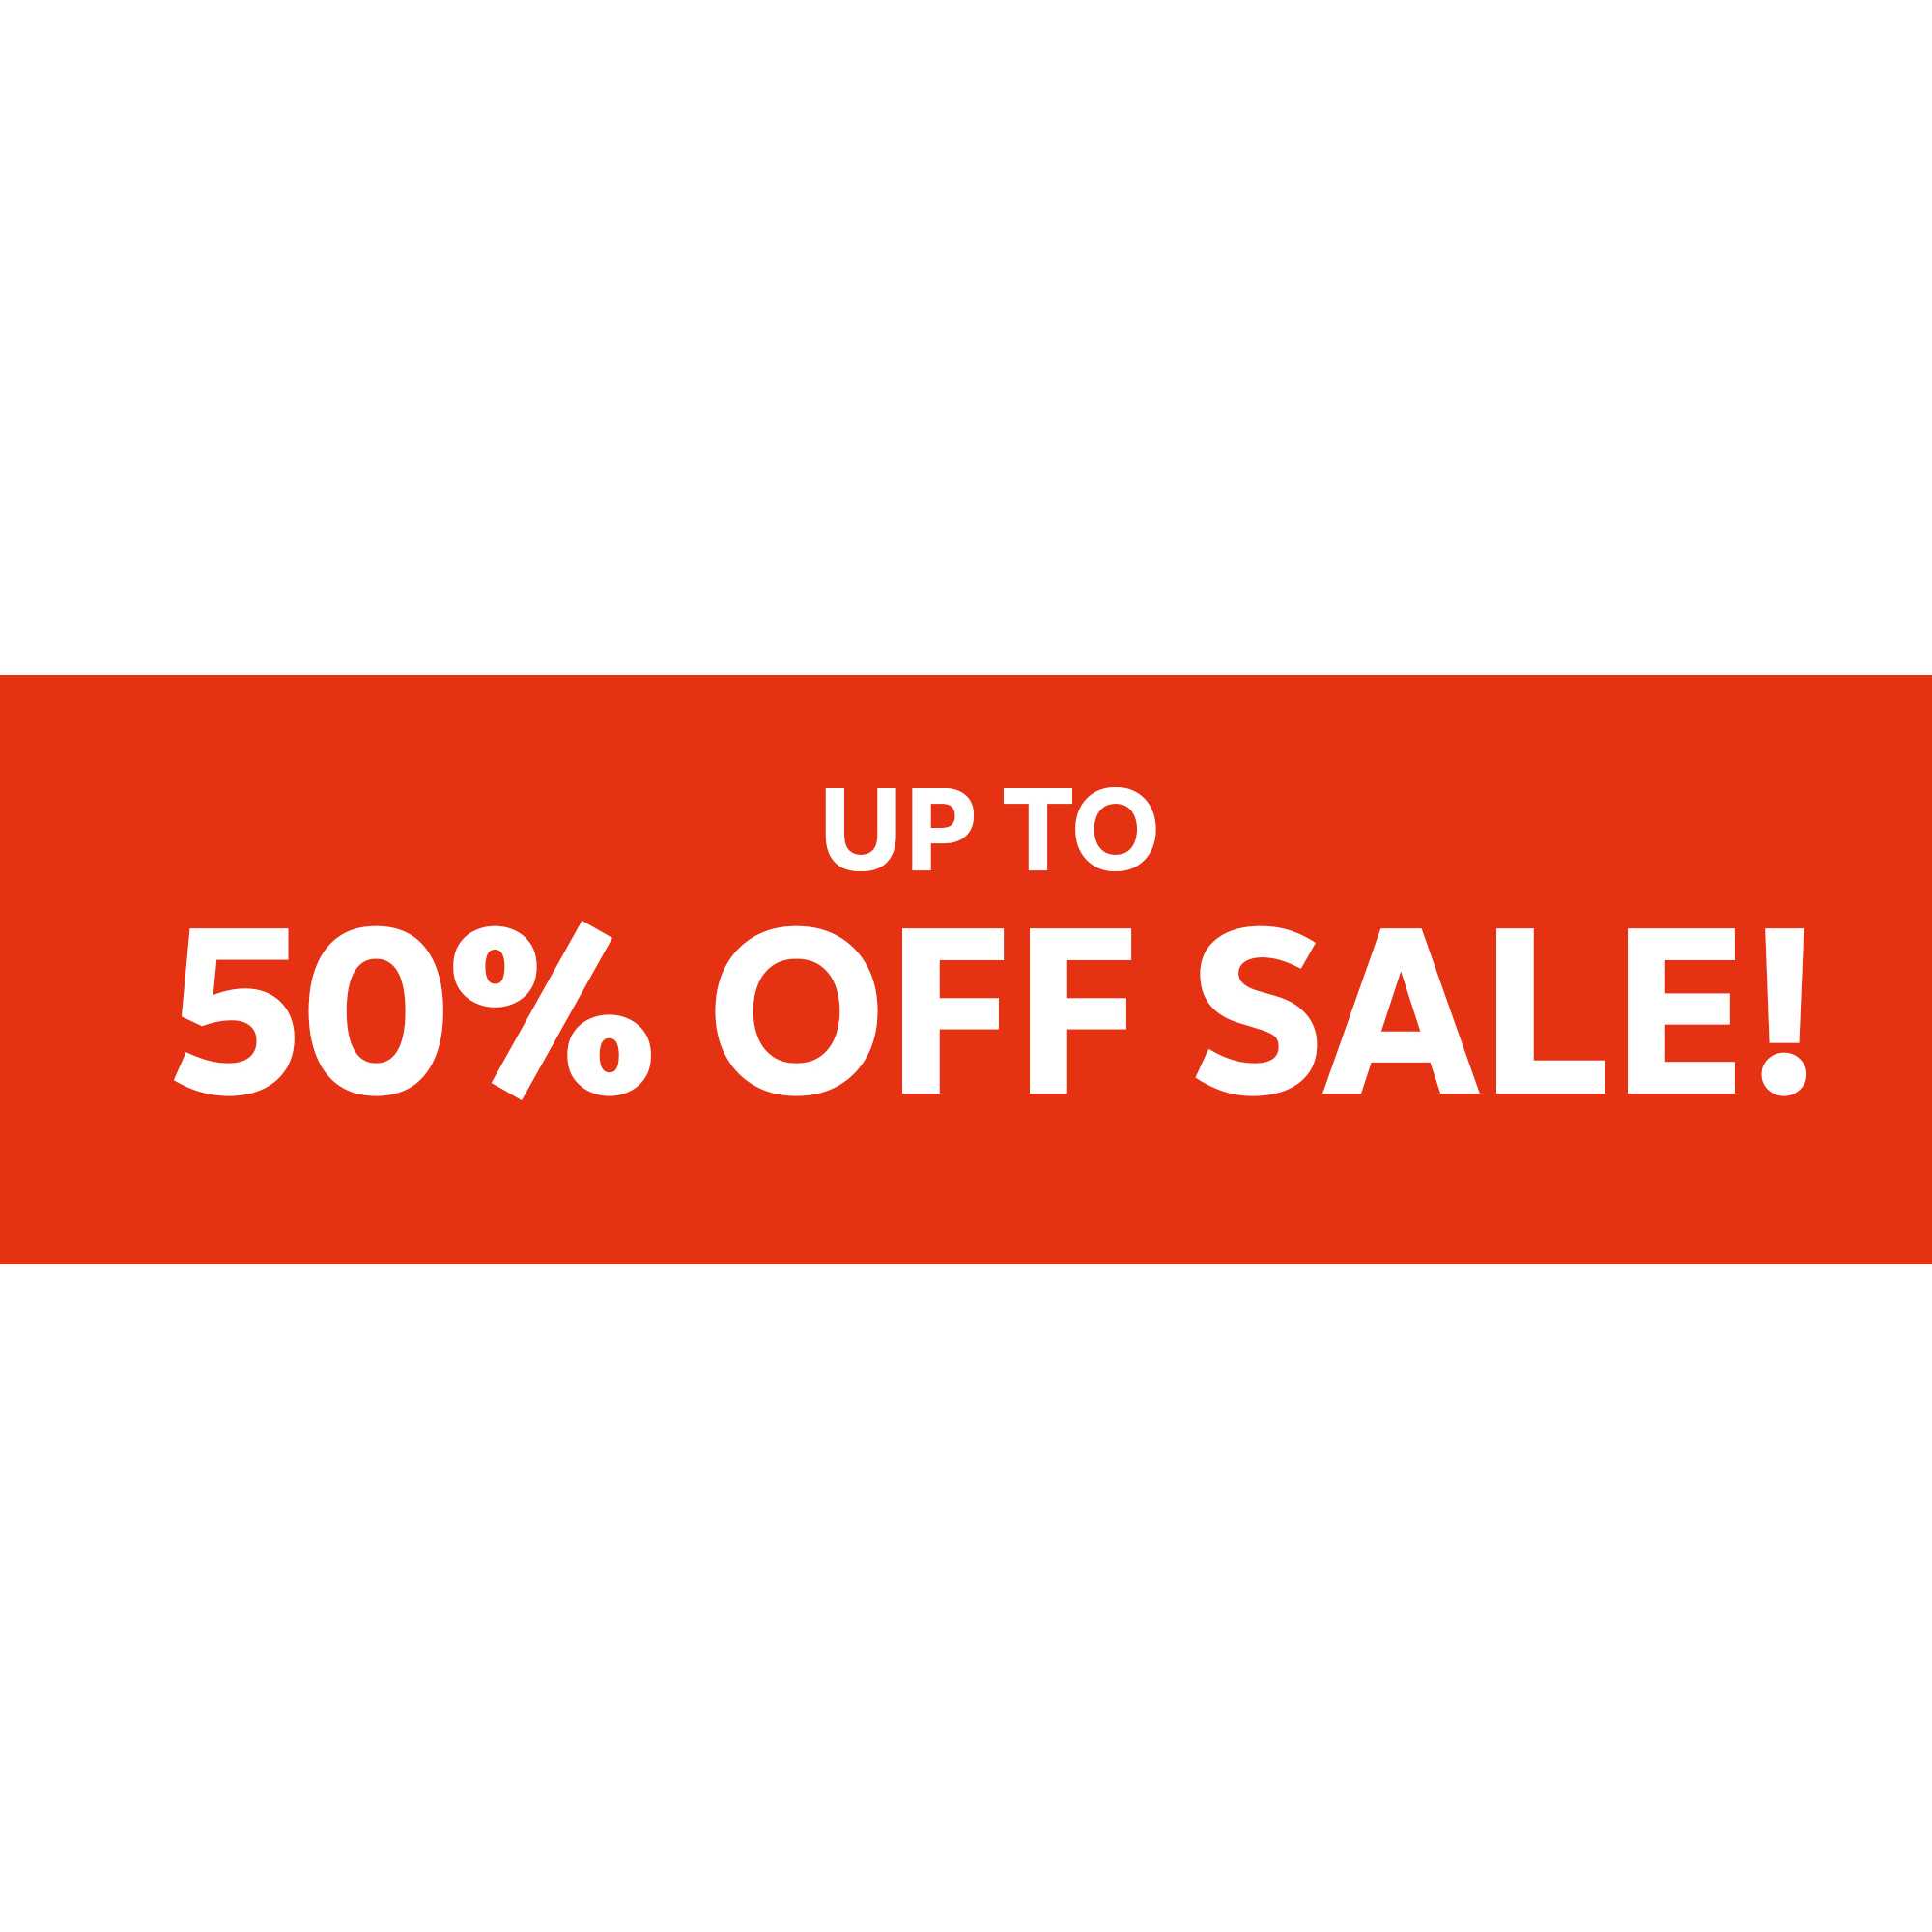 Up to 50% off sale.